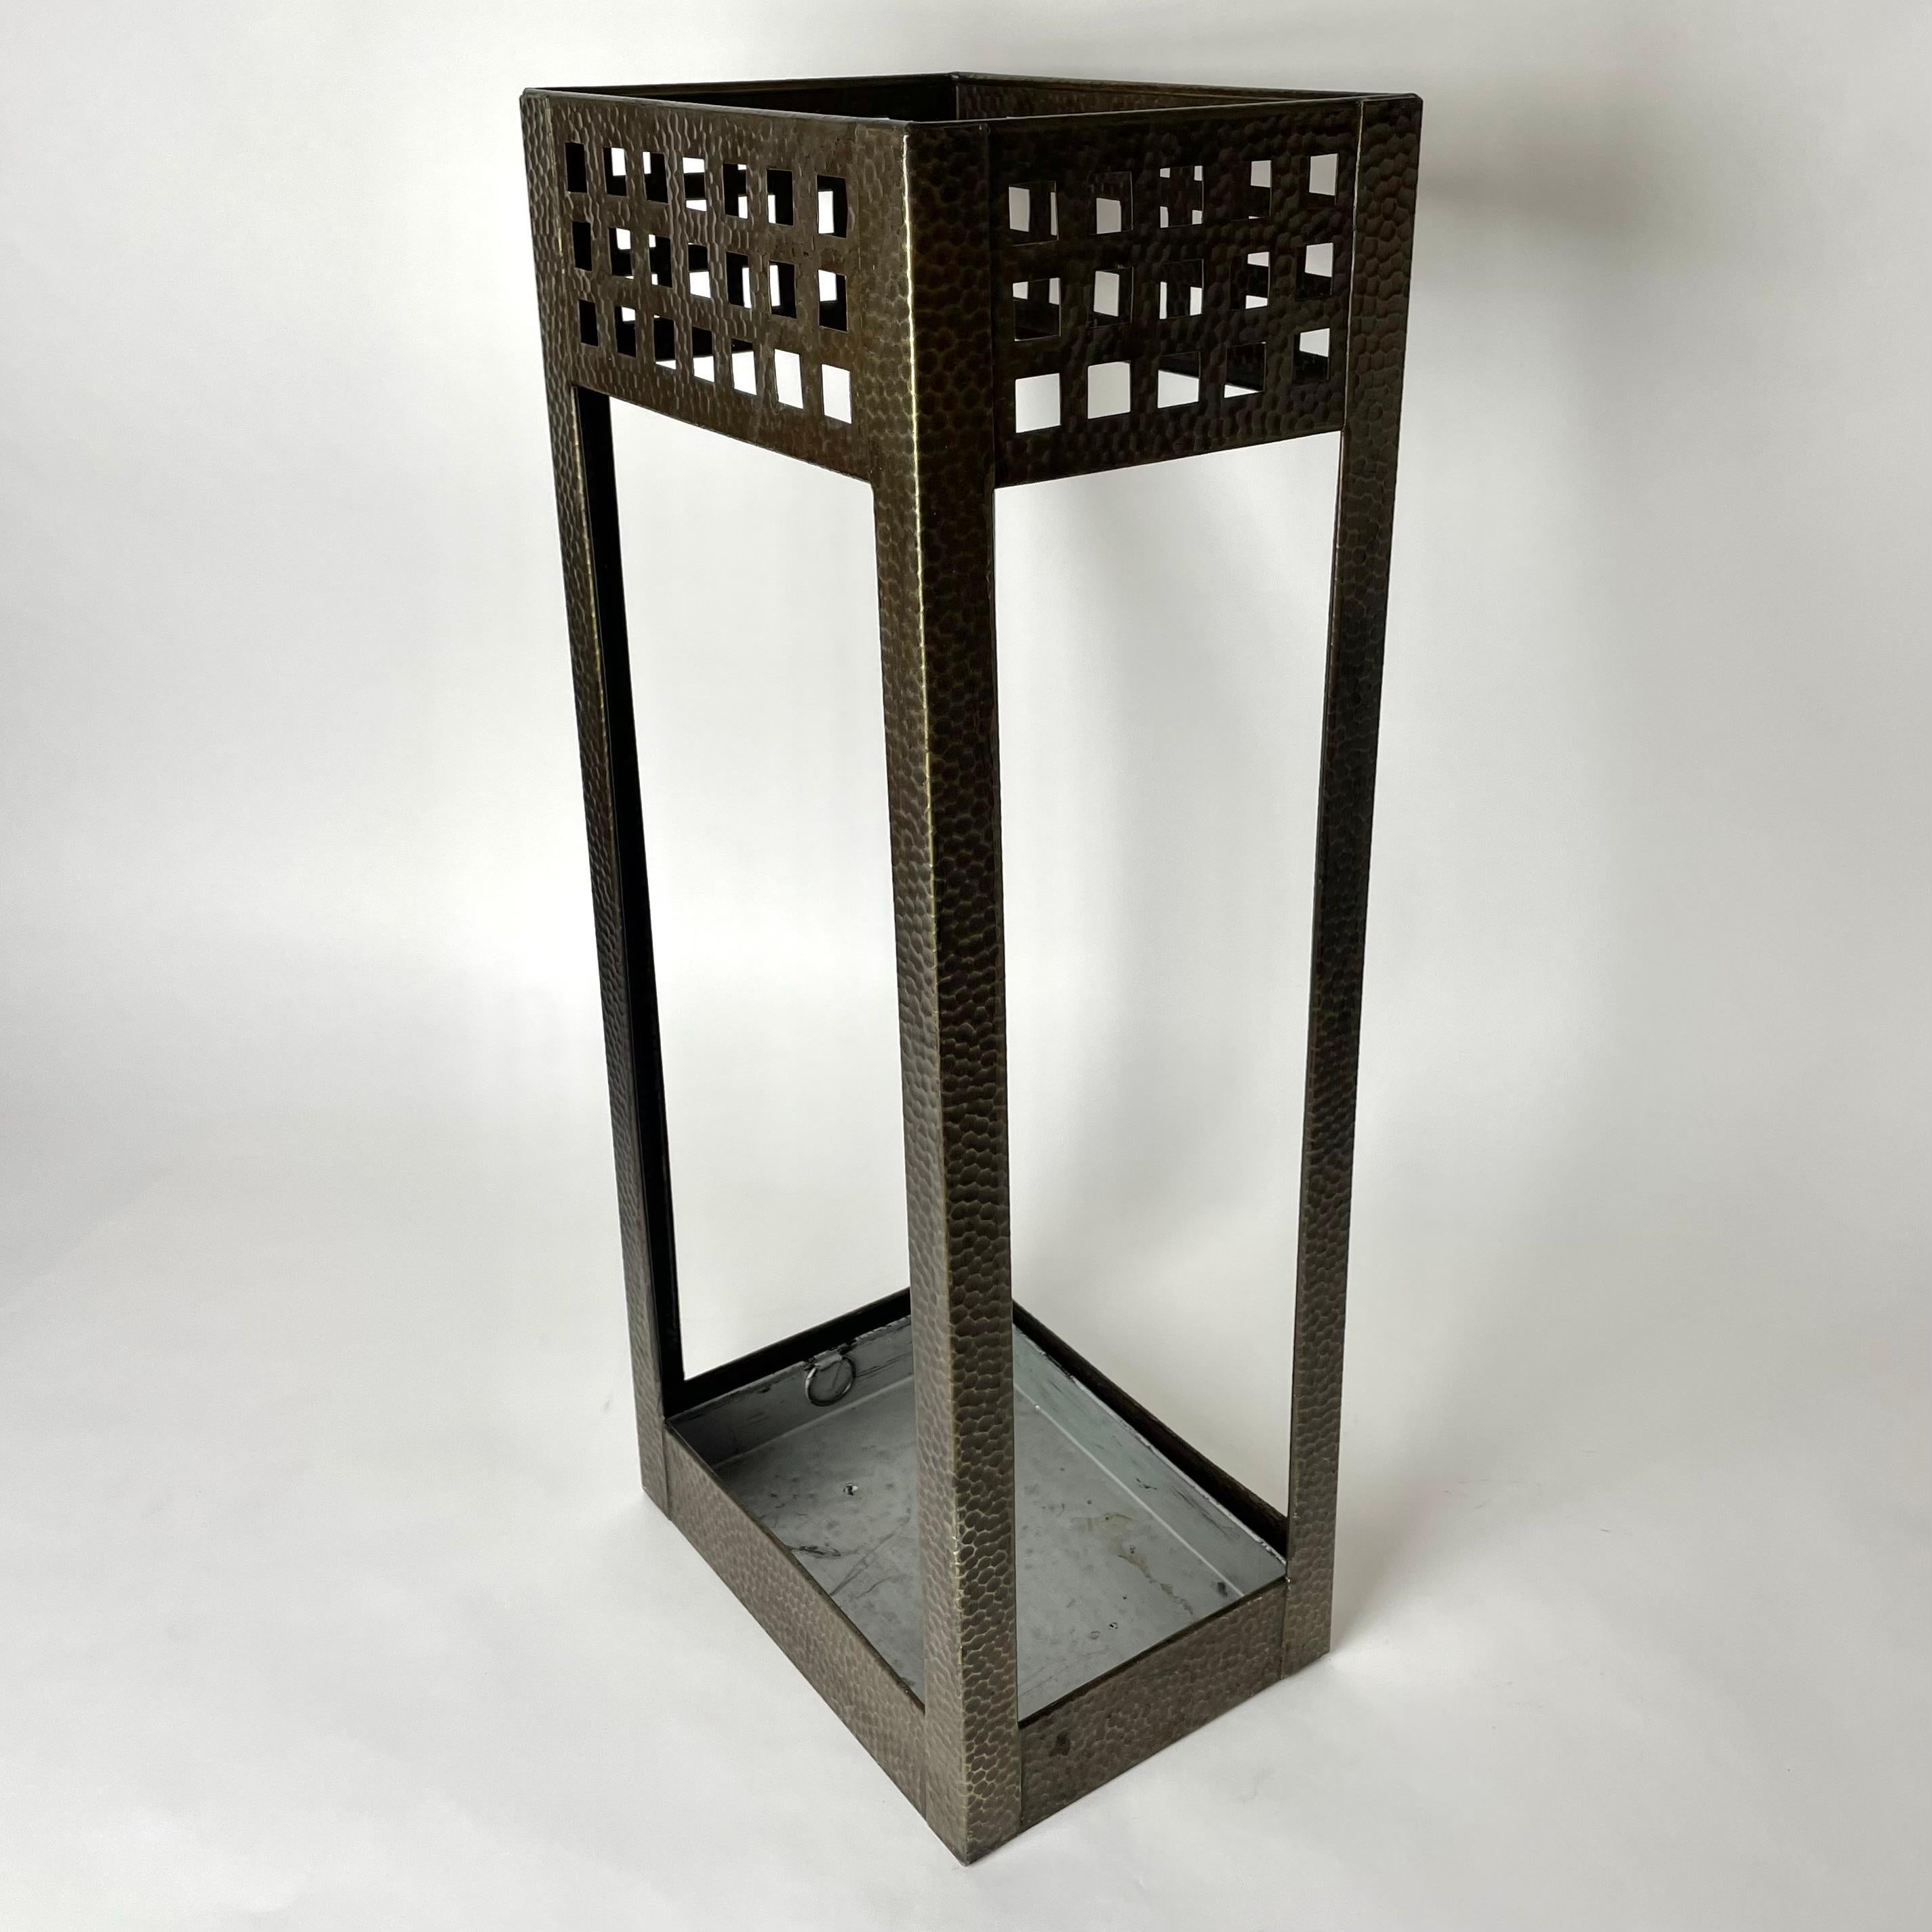 Elegant Umbrella Stand in hammered iron from the early 20th Century. In the style of Josef Hoffmann and Charles Rennie Mackintosh. In very period design from early 20th Century.

Wear consistent with age and use 